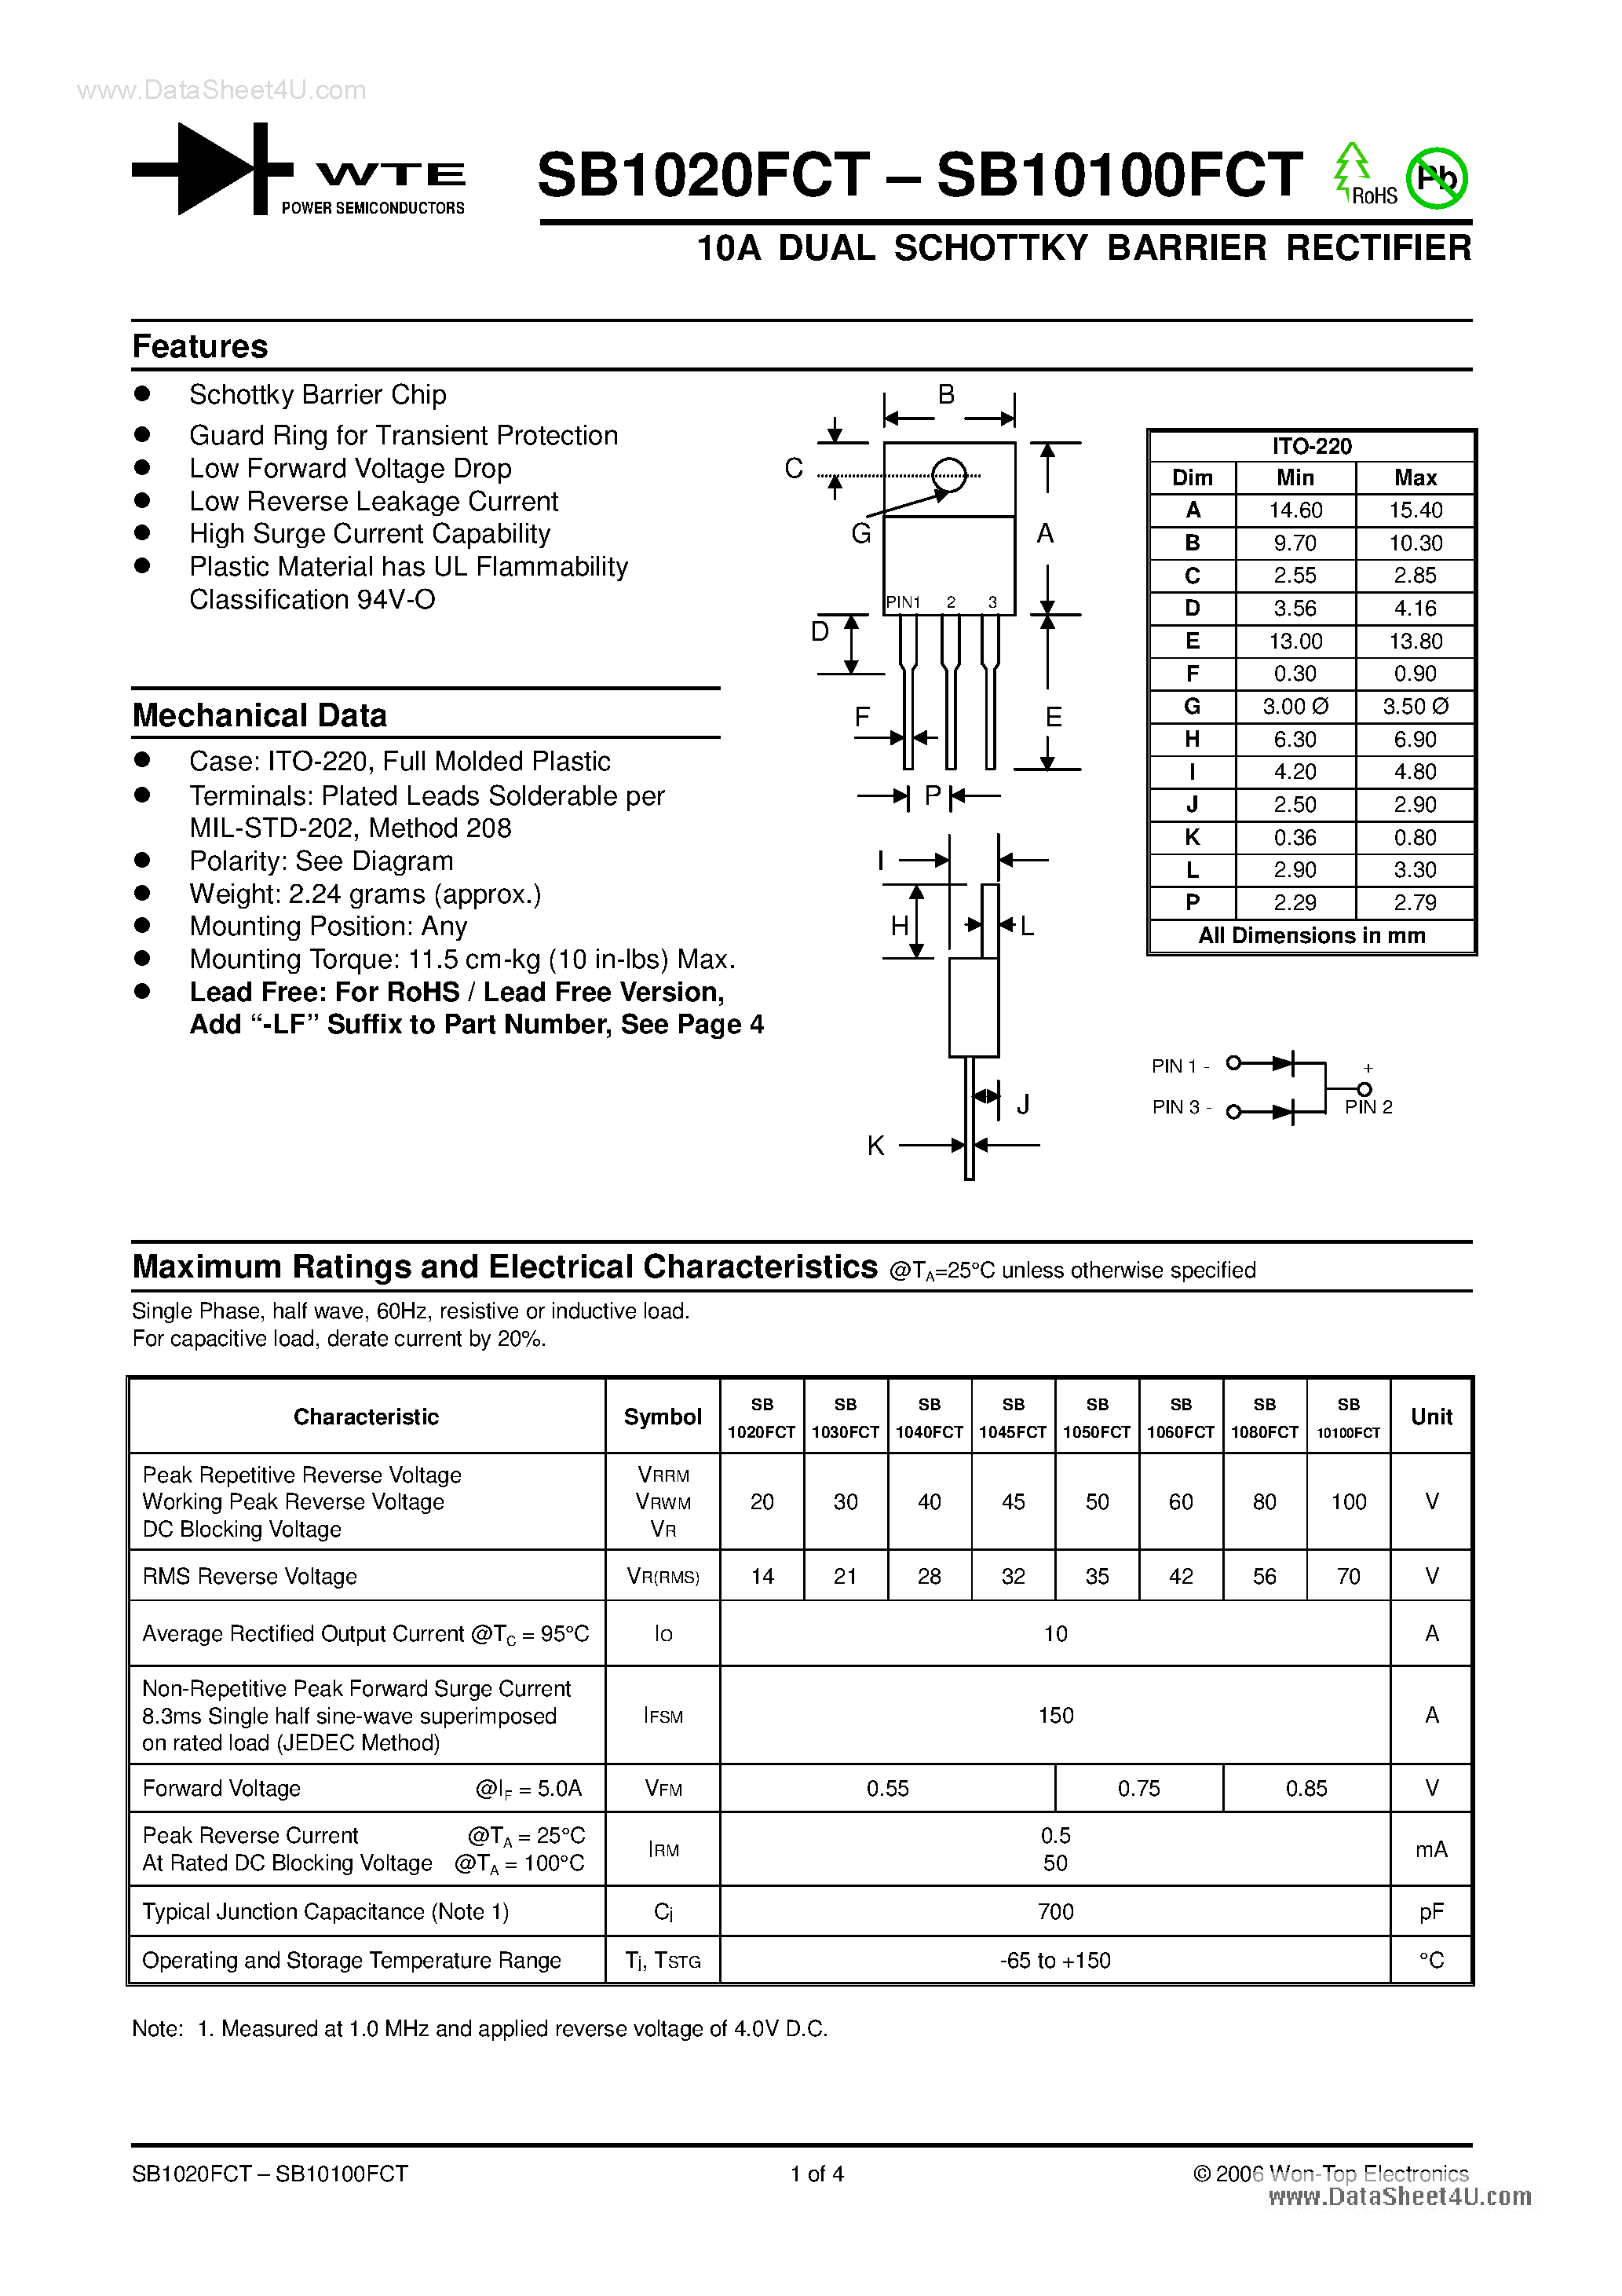 Datasheet SB10100FCT - (SB1020FCT - SB10100FCT) 10A DUAL SCHOTTKY BARRIER RECTIFIER page 1